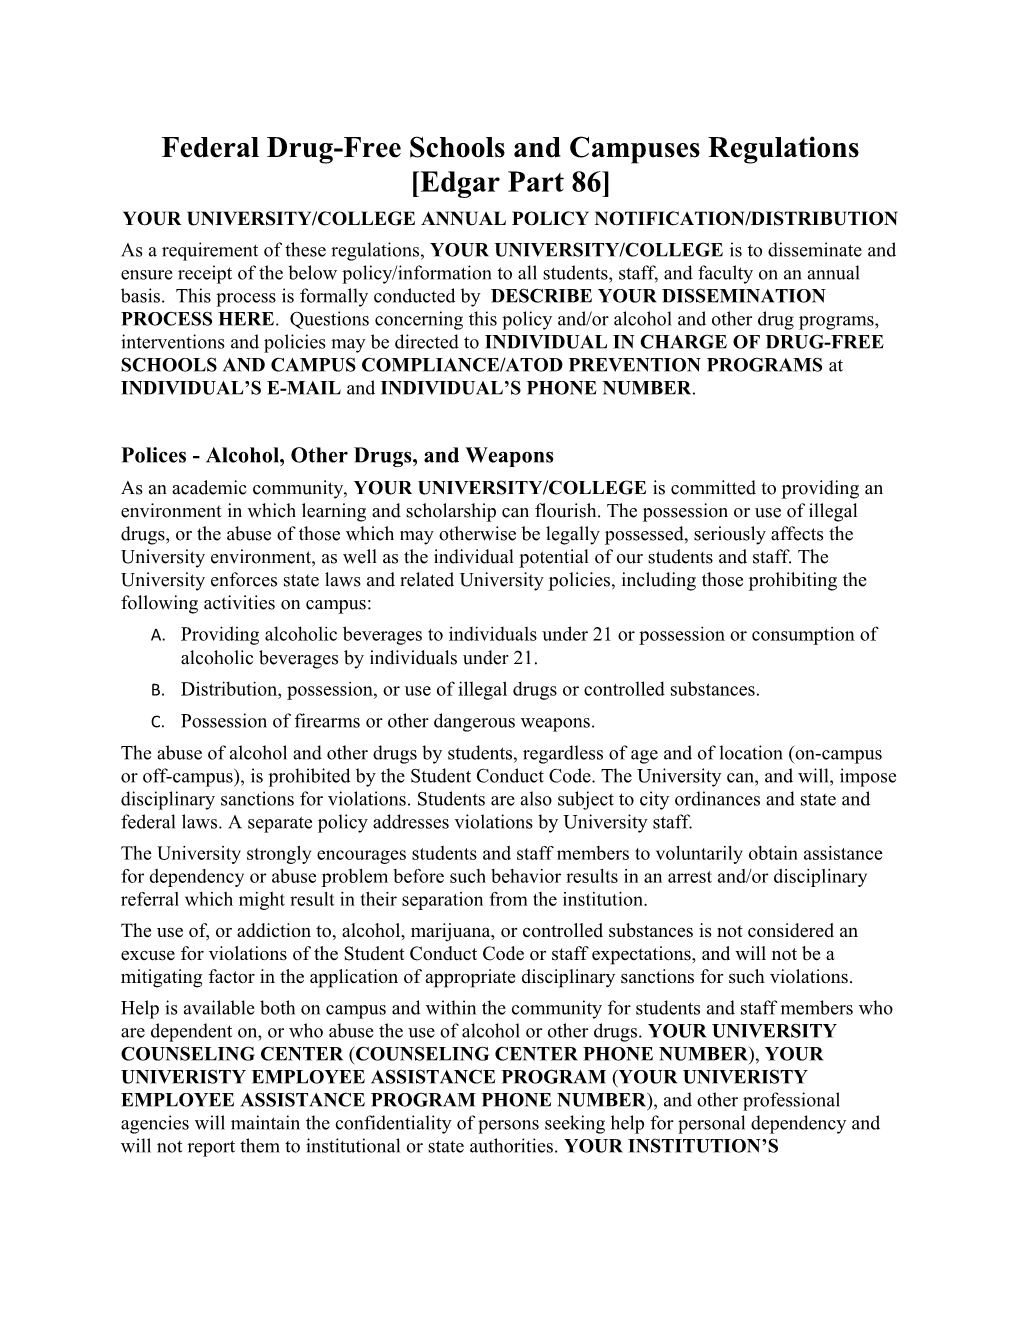 Federal Drug-Free Schools and Campuses Regulations Edgar Part 86